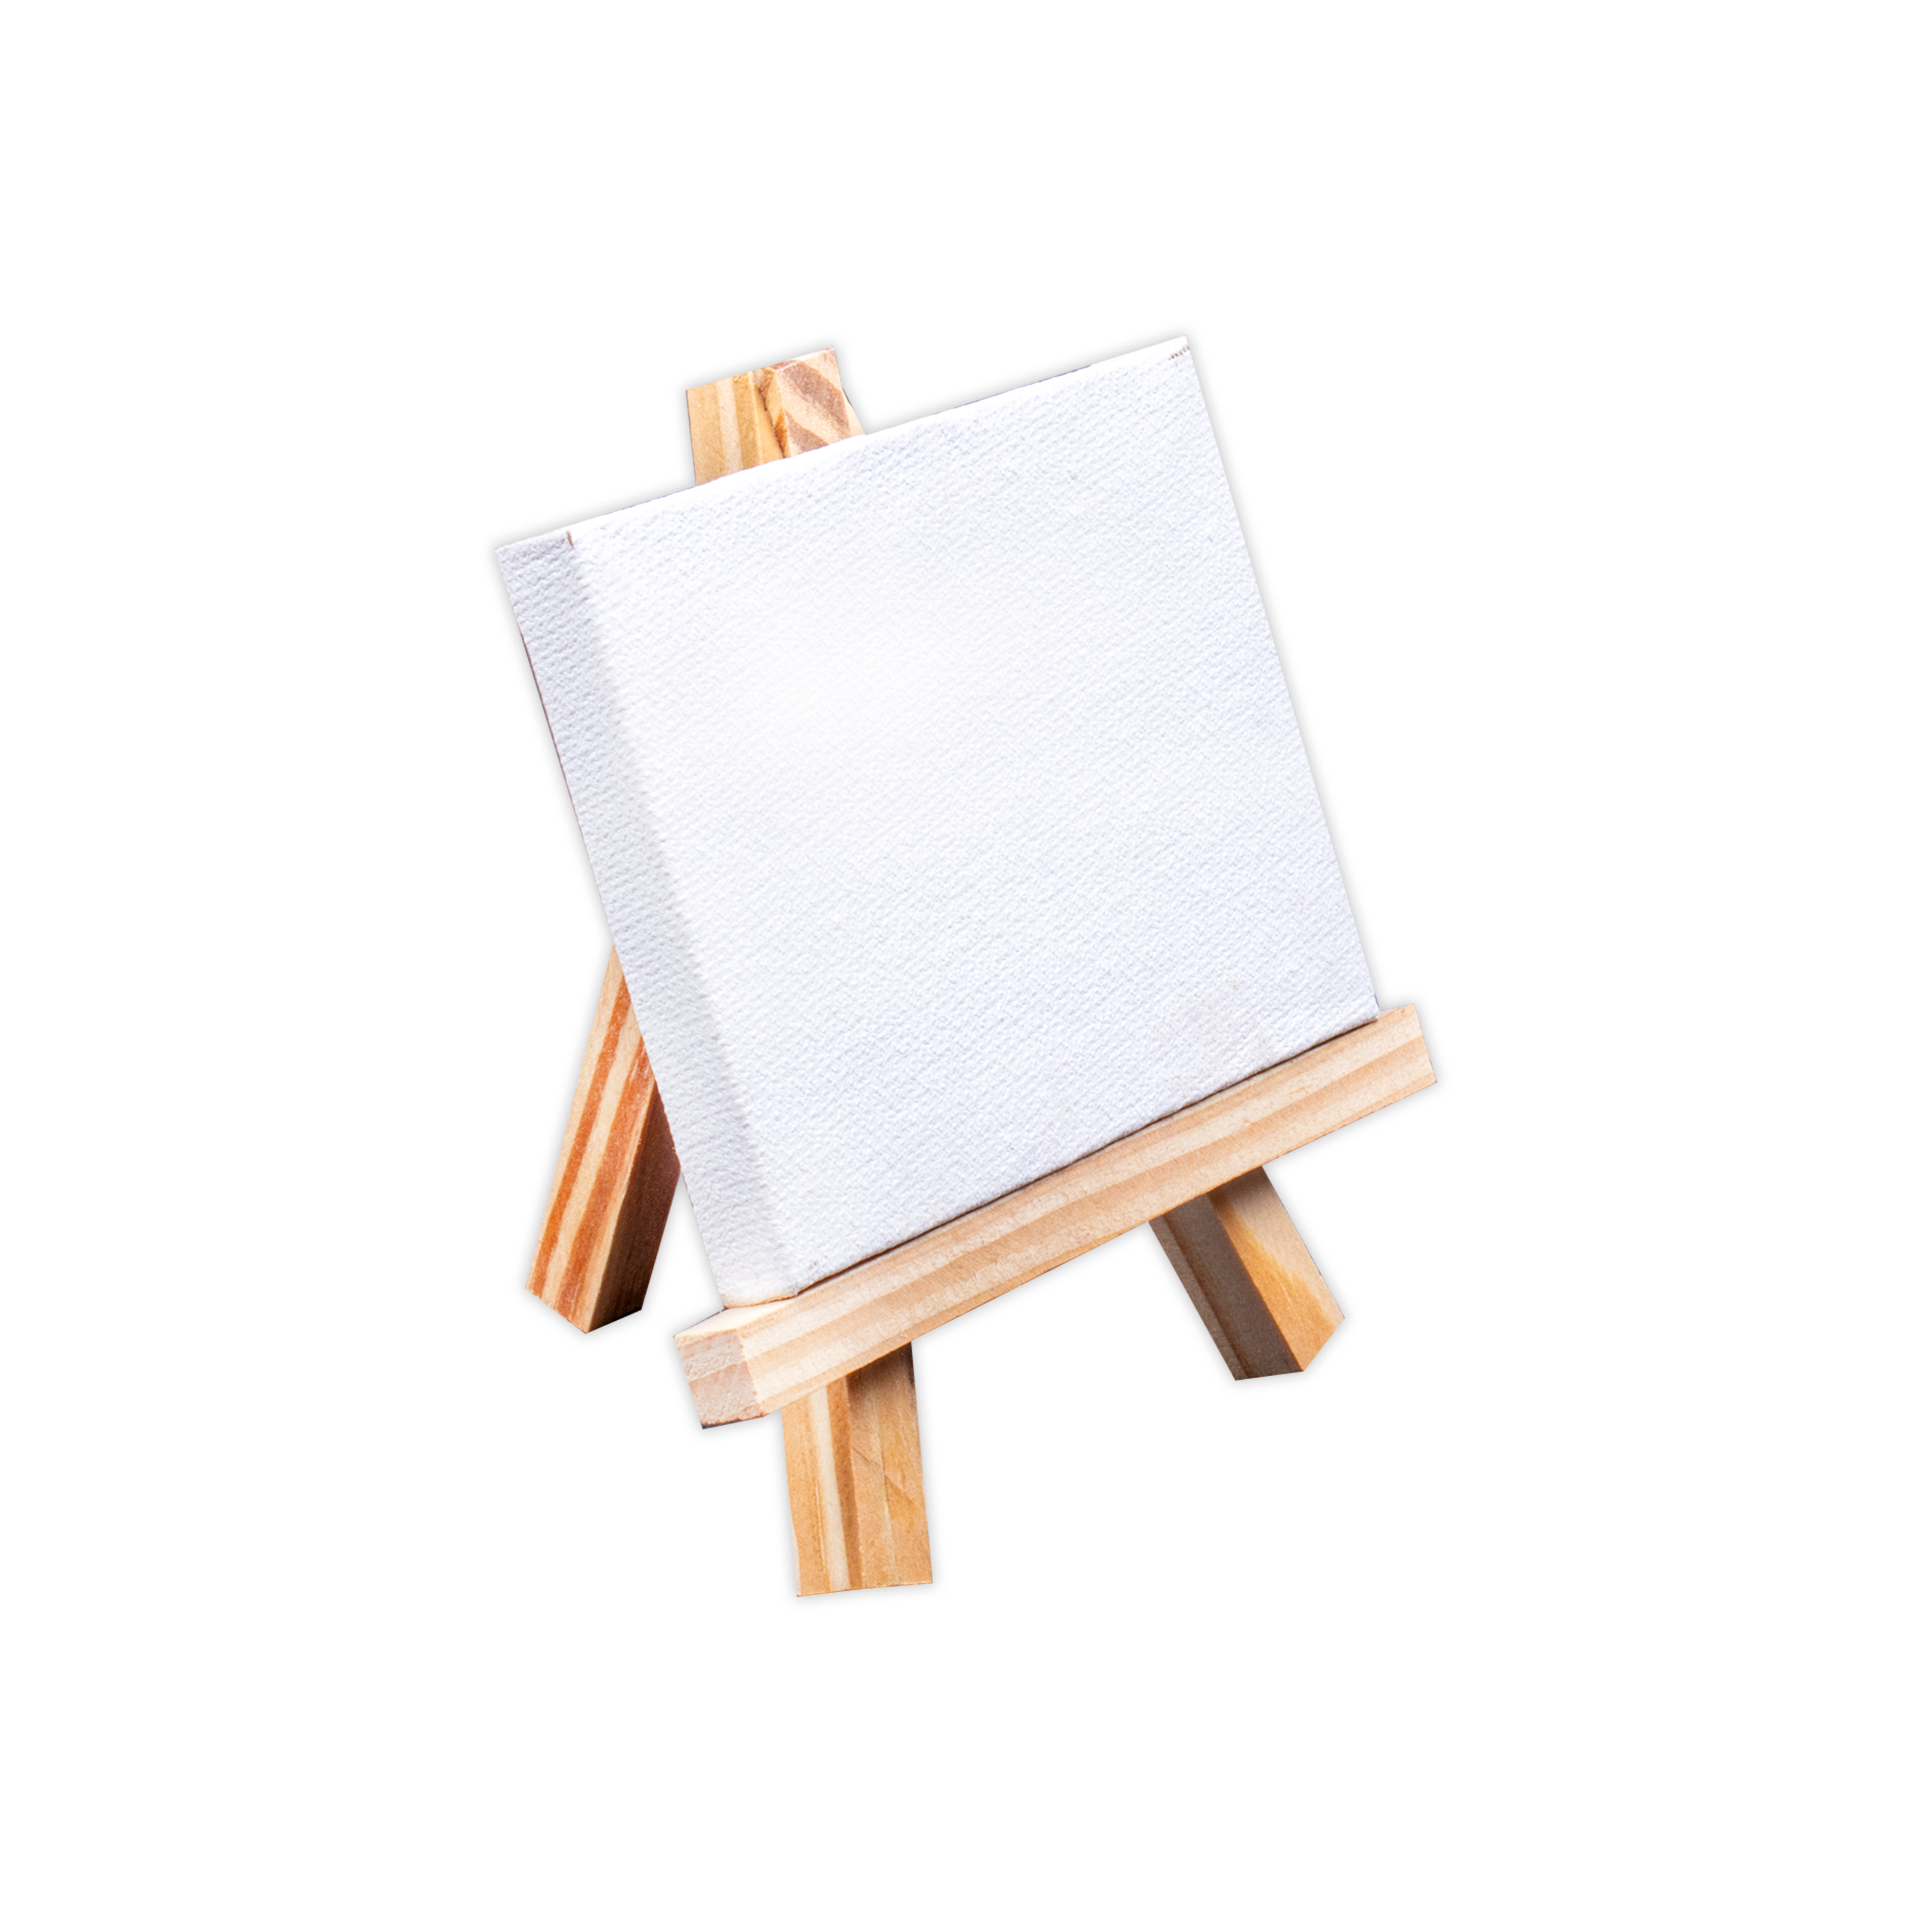 Wooden Mini Easel With Canvas Easel Size 11cm Canvas Size 10 X 7cm Set of 5pc